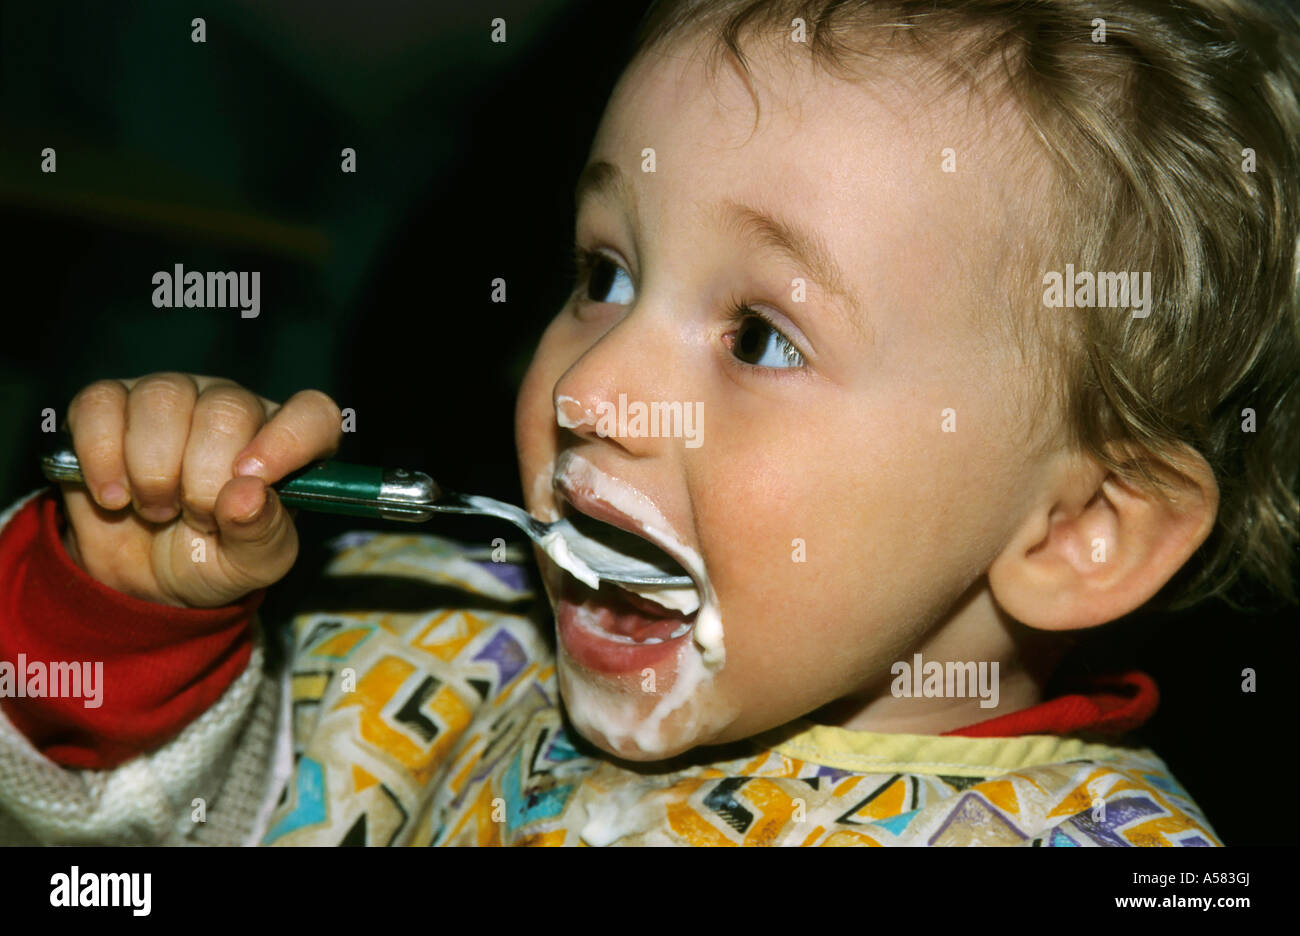 Baby girl eating from a spoon and getting most of it on her face. Stock Photo